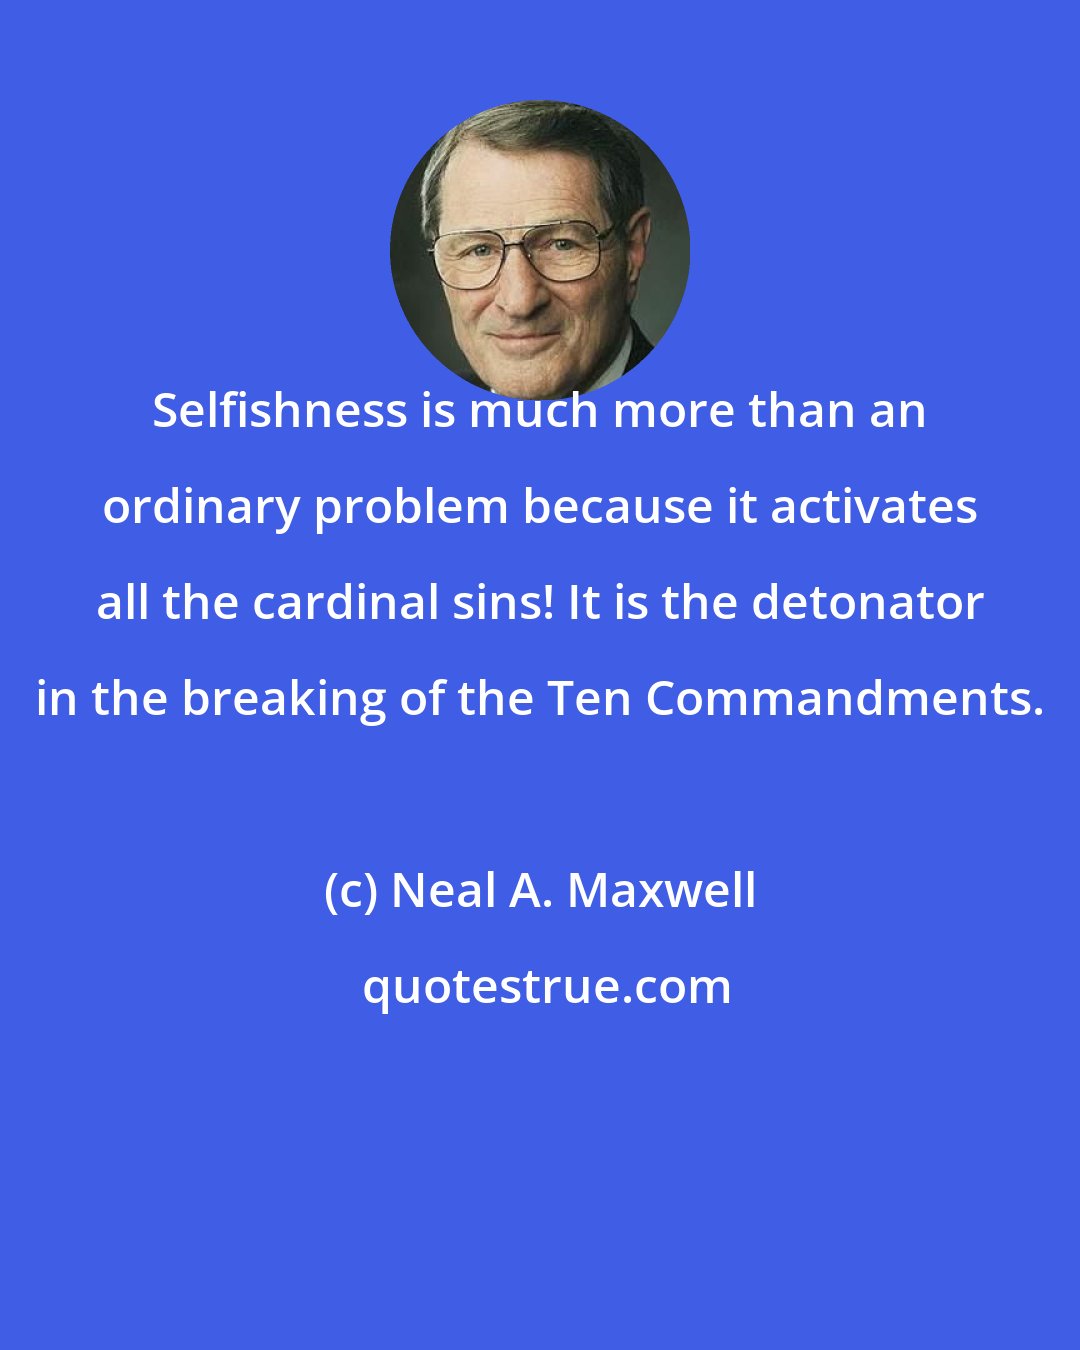 Neal A. Maxwell: Selfishness is much more than an ordinary problem because it activates all the cardinal sins! It is the detonator in the breaking of the Ten Commandments.